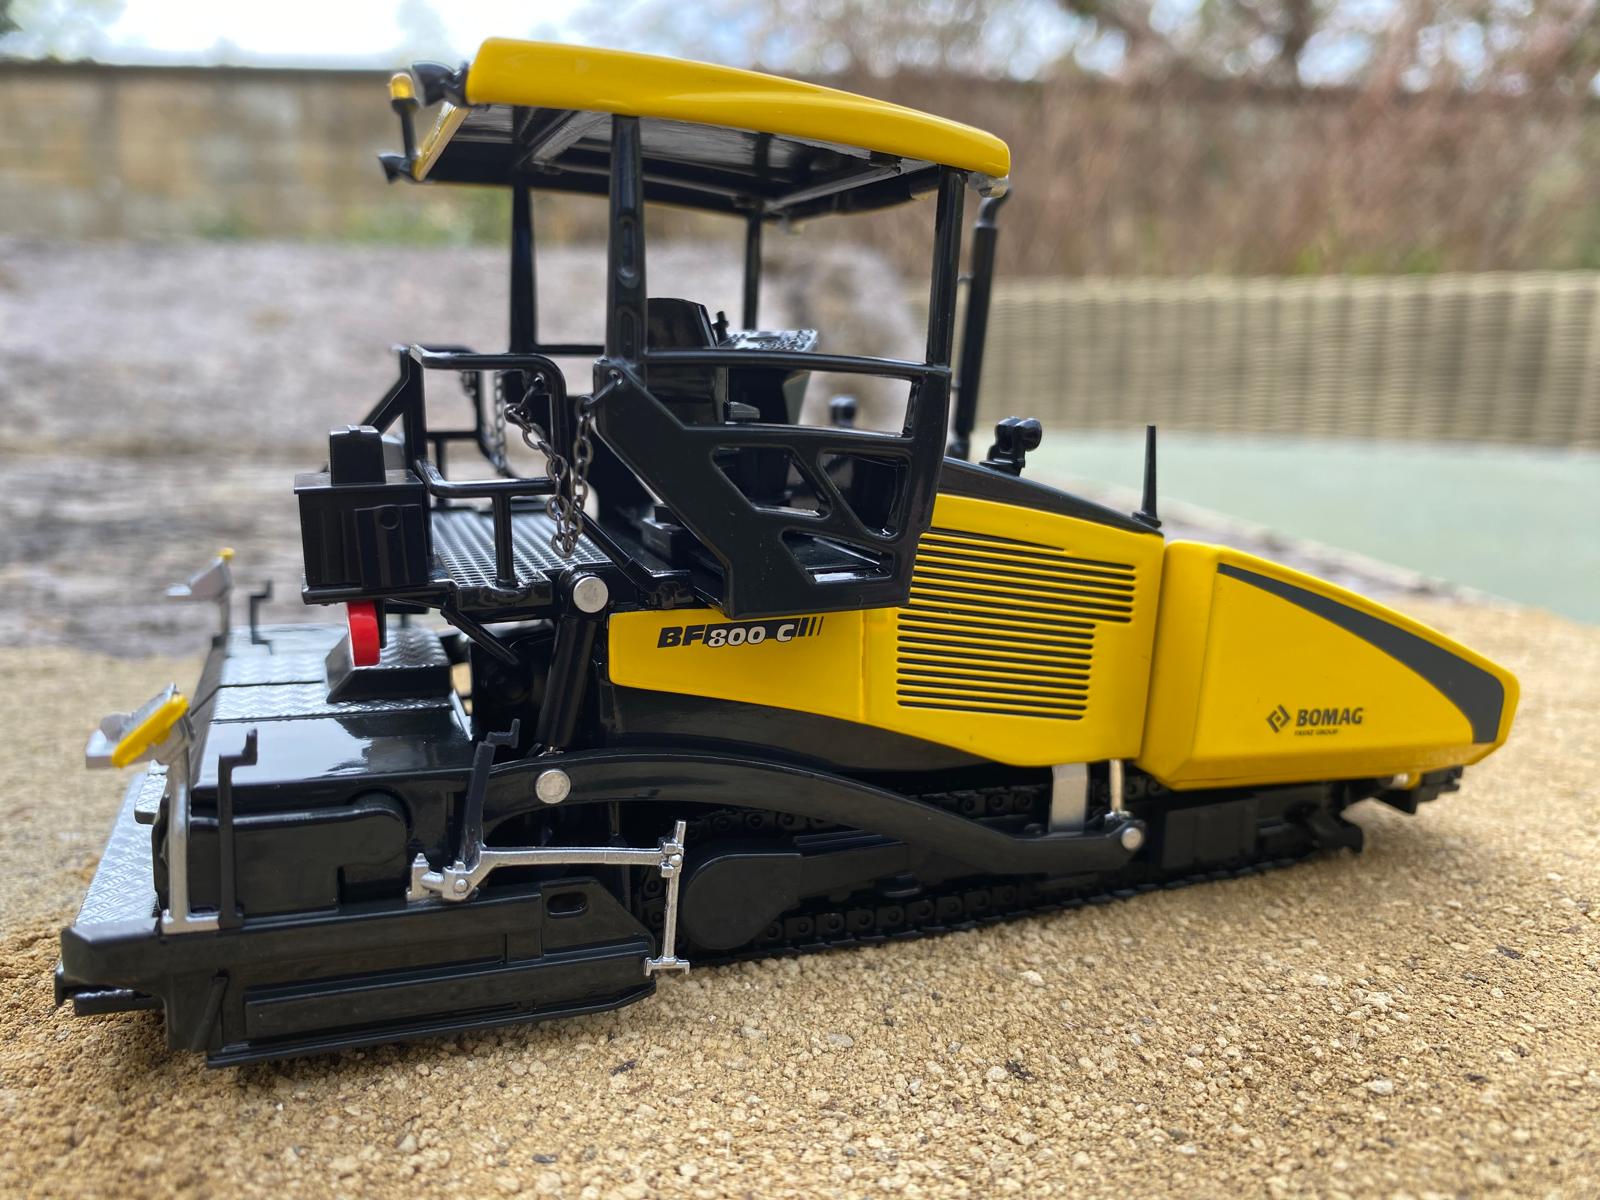 BOMAG BF 800 C Paver. 1:50 scale